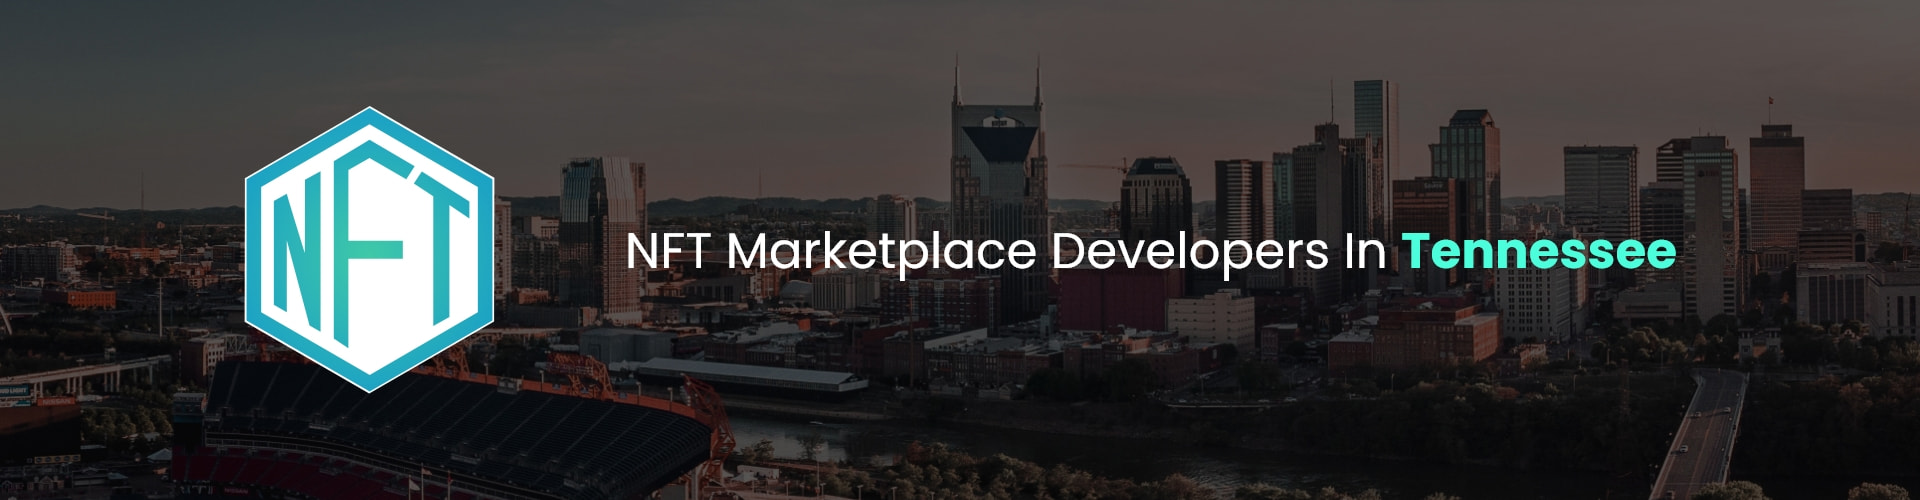 hire nft marketplace developers in tennessee